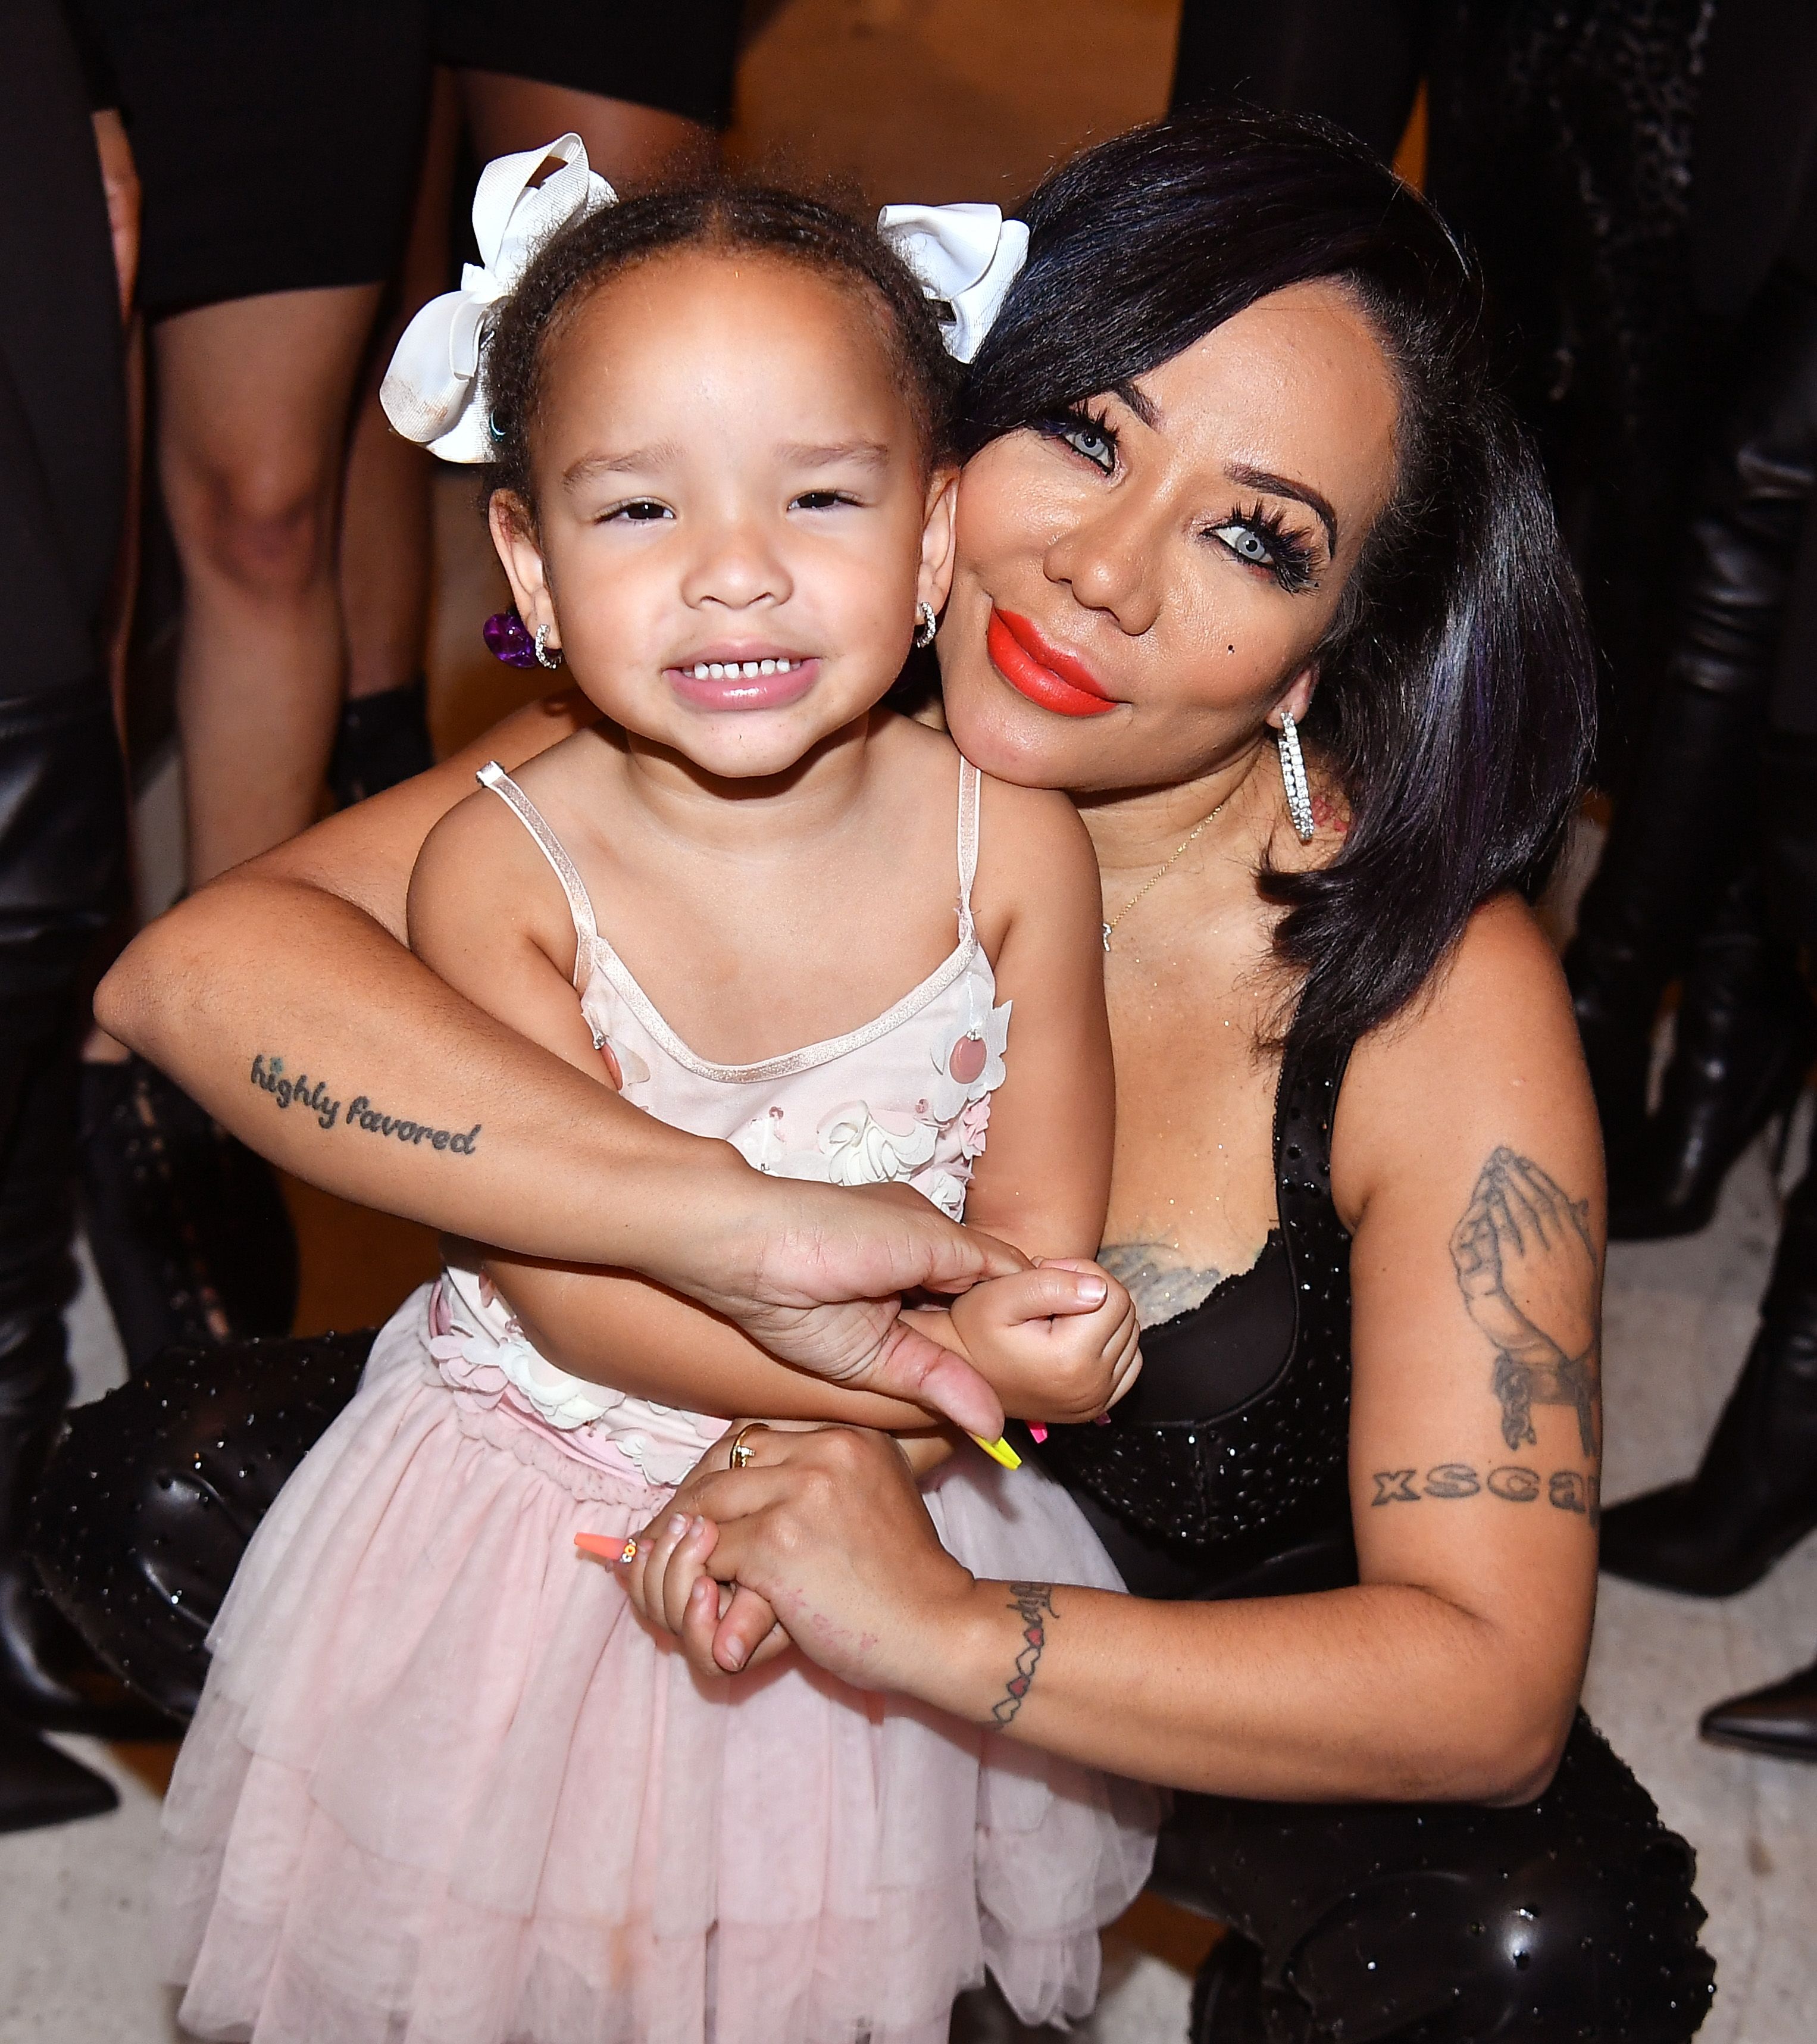 Tameka "Tiny" Harris with her daughter Heiress Diana Harris backstage during "Majic 107.5 After Dark" in Atlanta, Georgia in 2019. | Photo: Getty Images